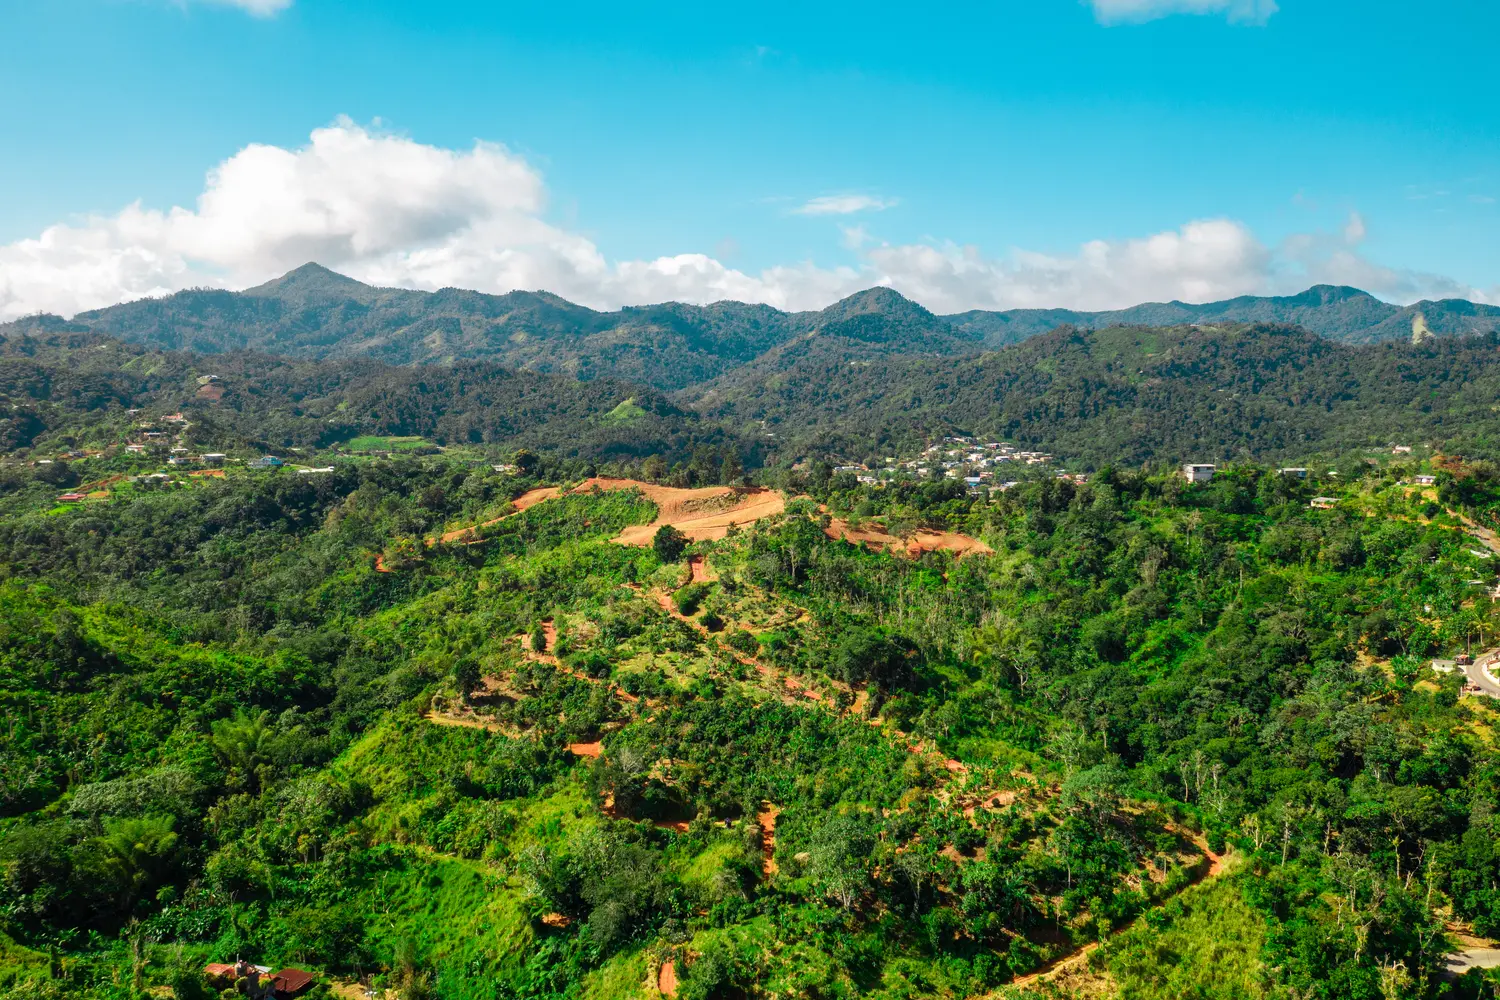 An aerial view of the Mountain landscapes of Adjuntas, Puerto Rico